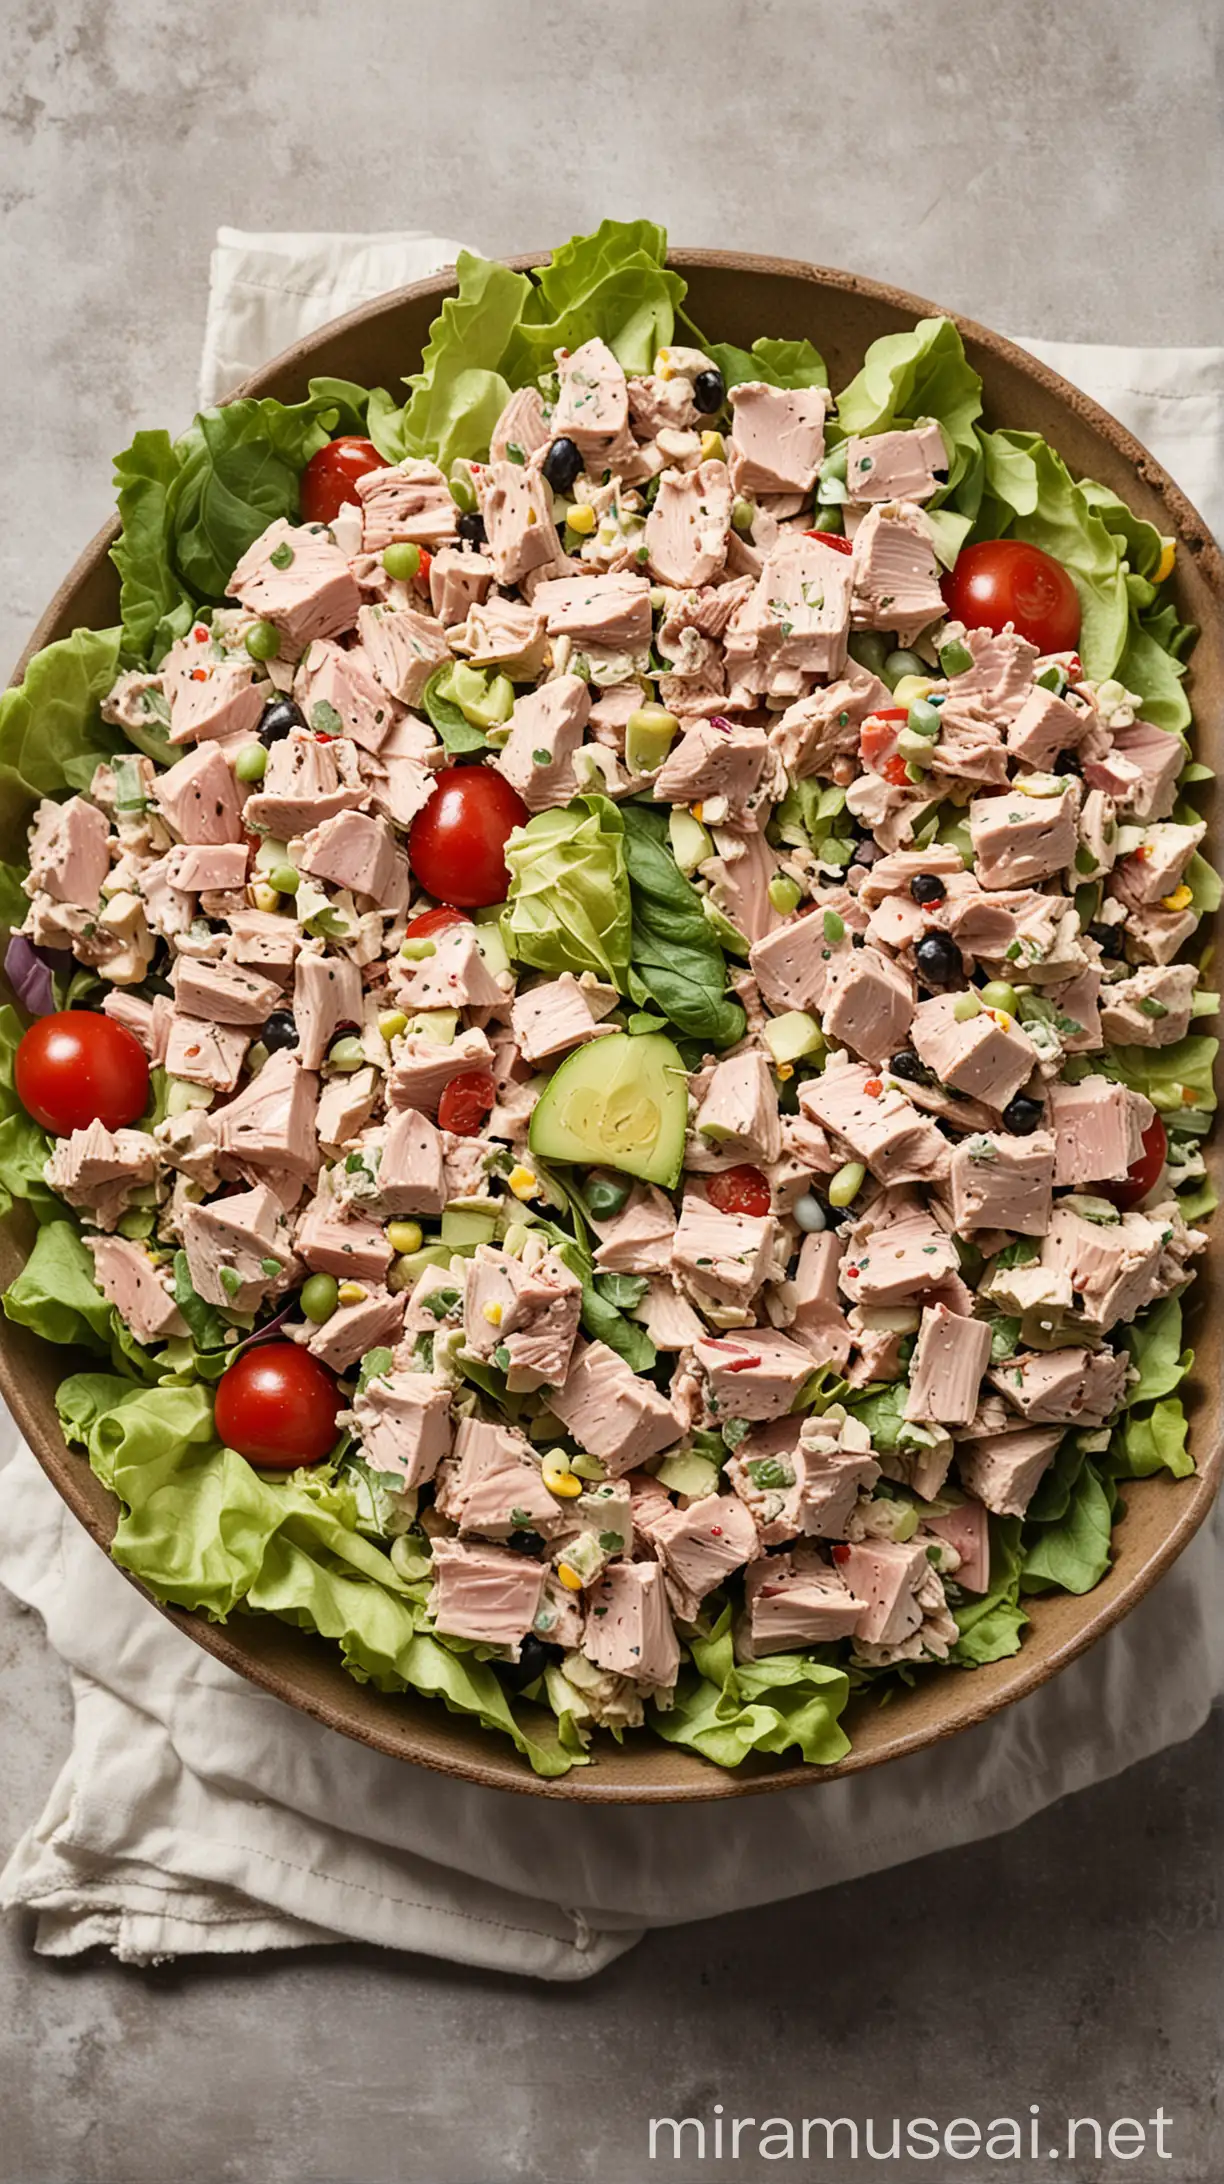 Delicious Tuna Salad with Fresh Vegetables and Herbs